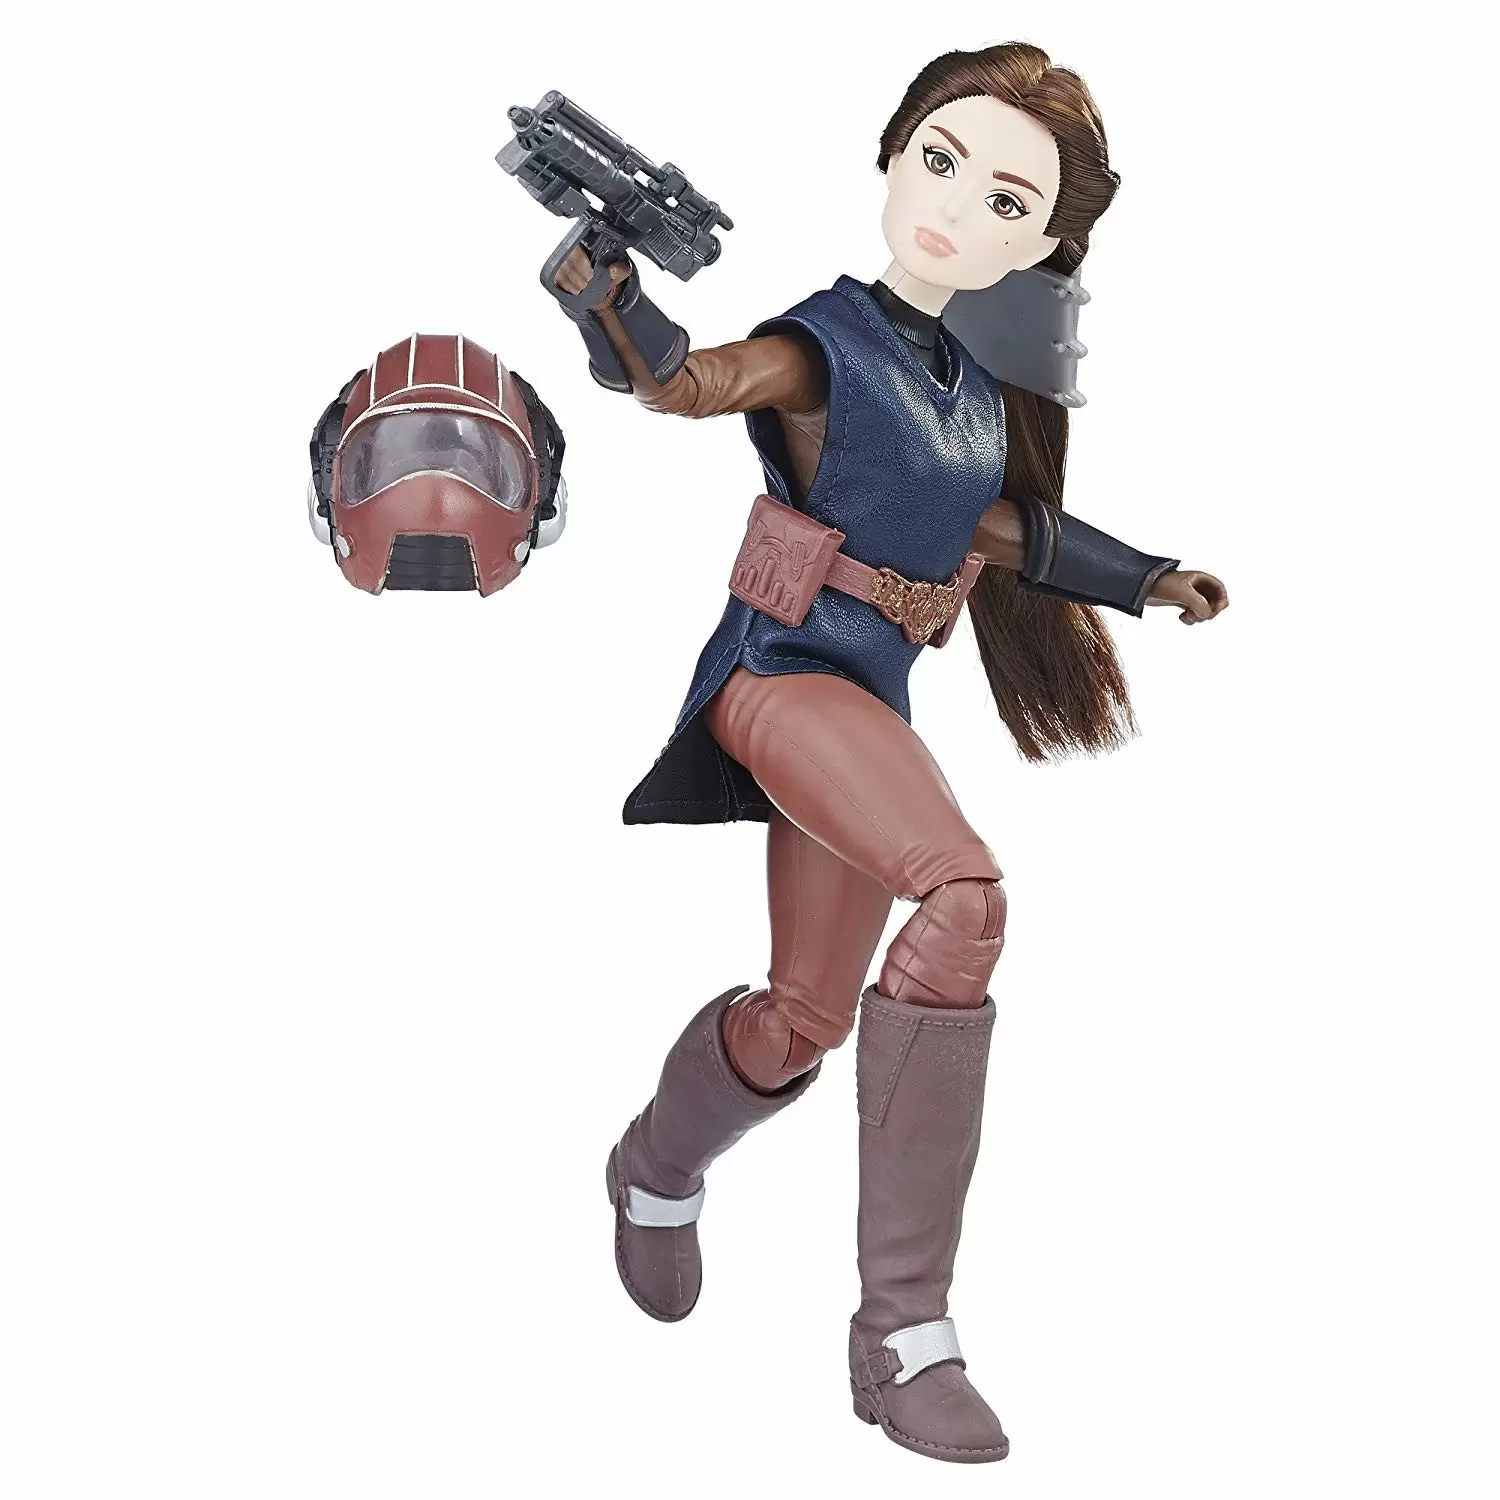 PADME AMIDALA STAR WARS FORCES OF DESTINY 12" INCH COLLECTION VON HASBRO 